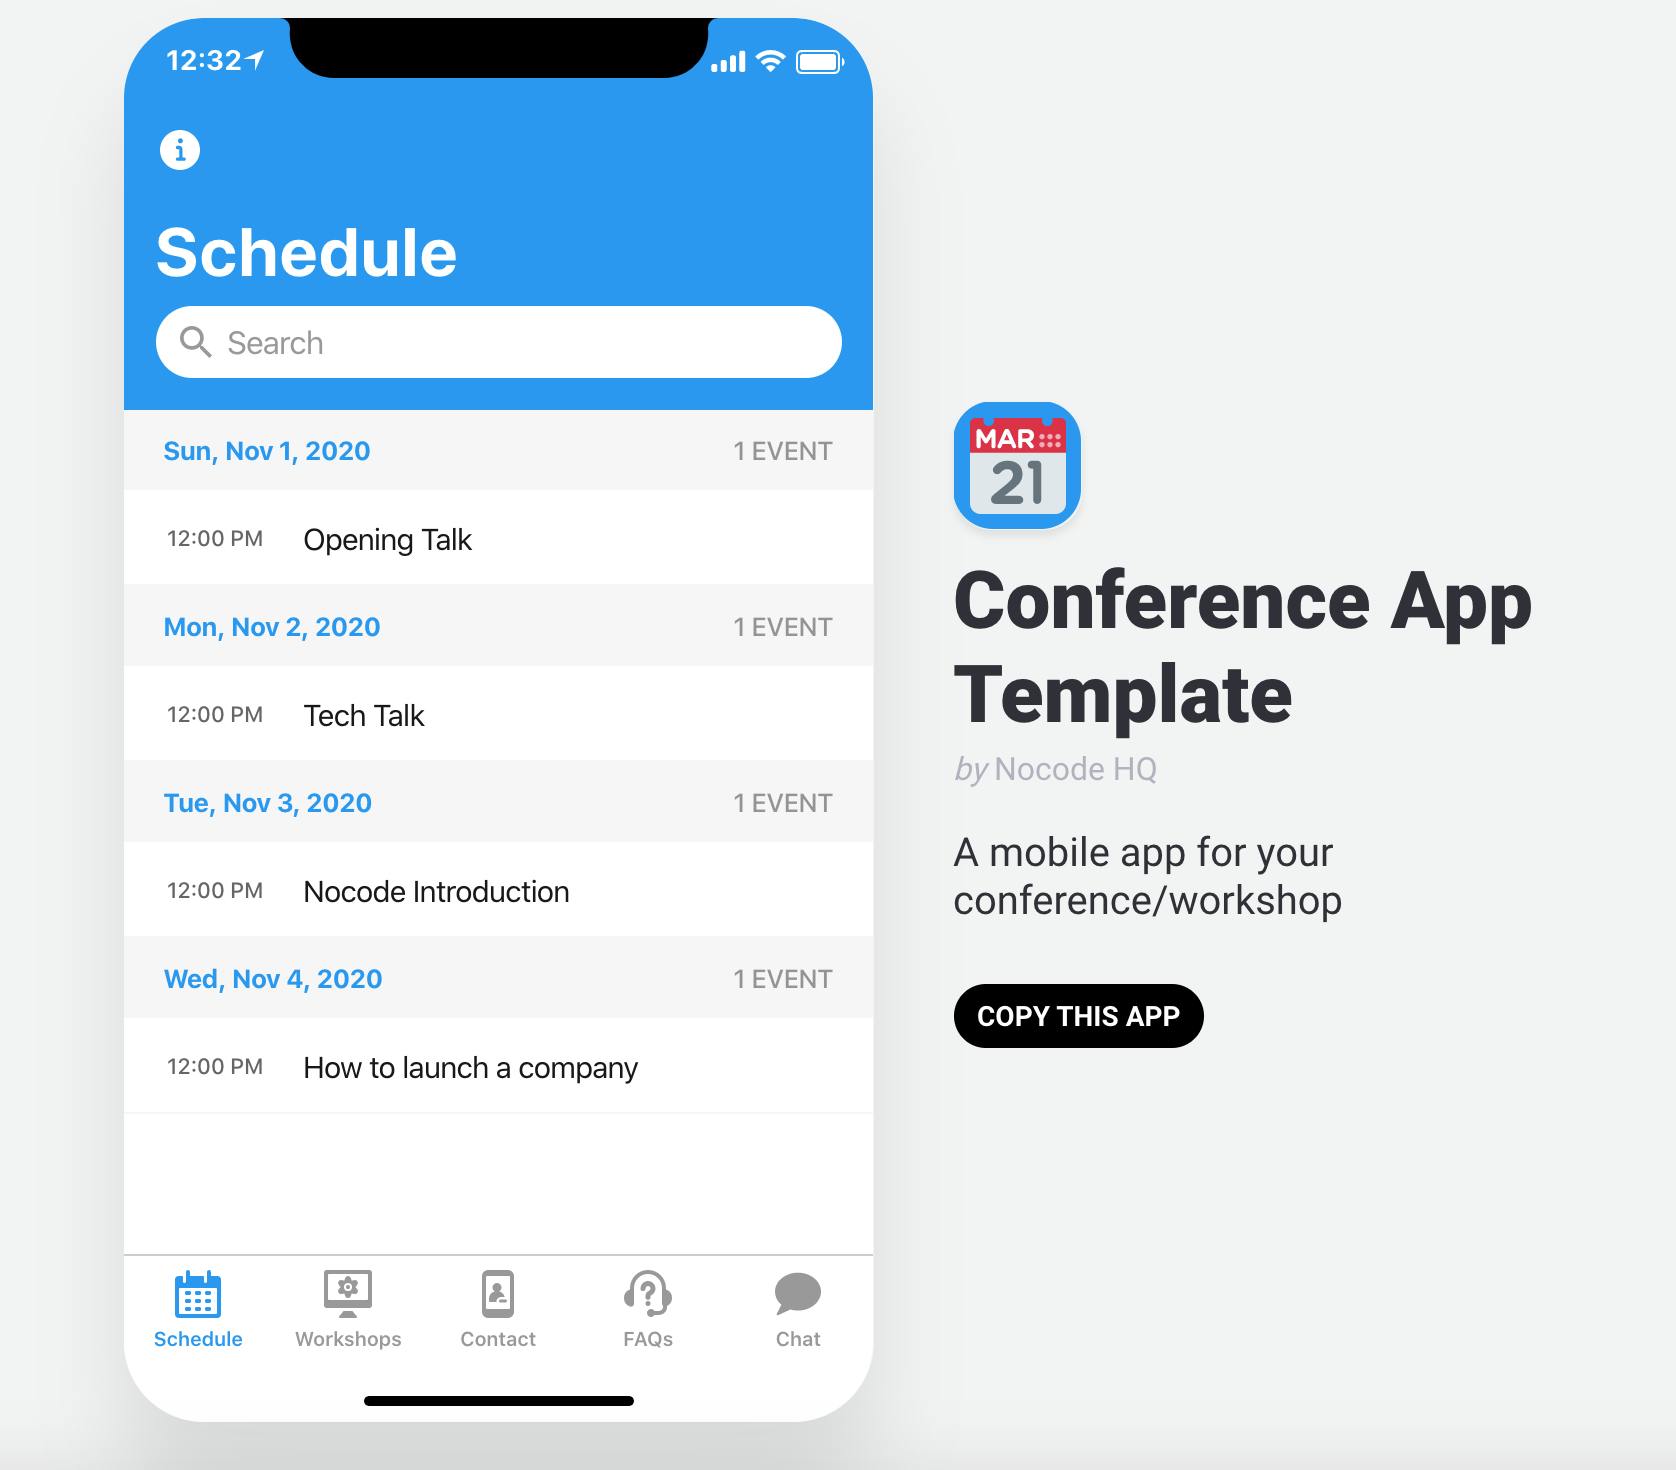 Conference App